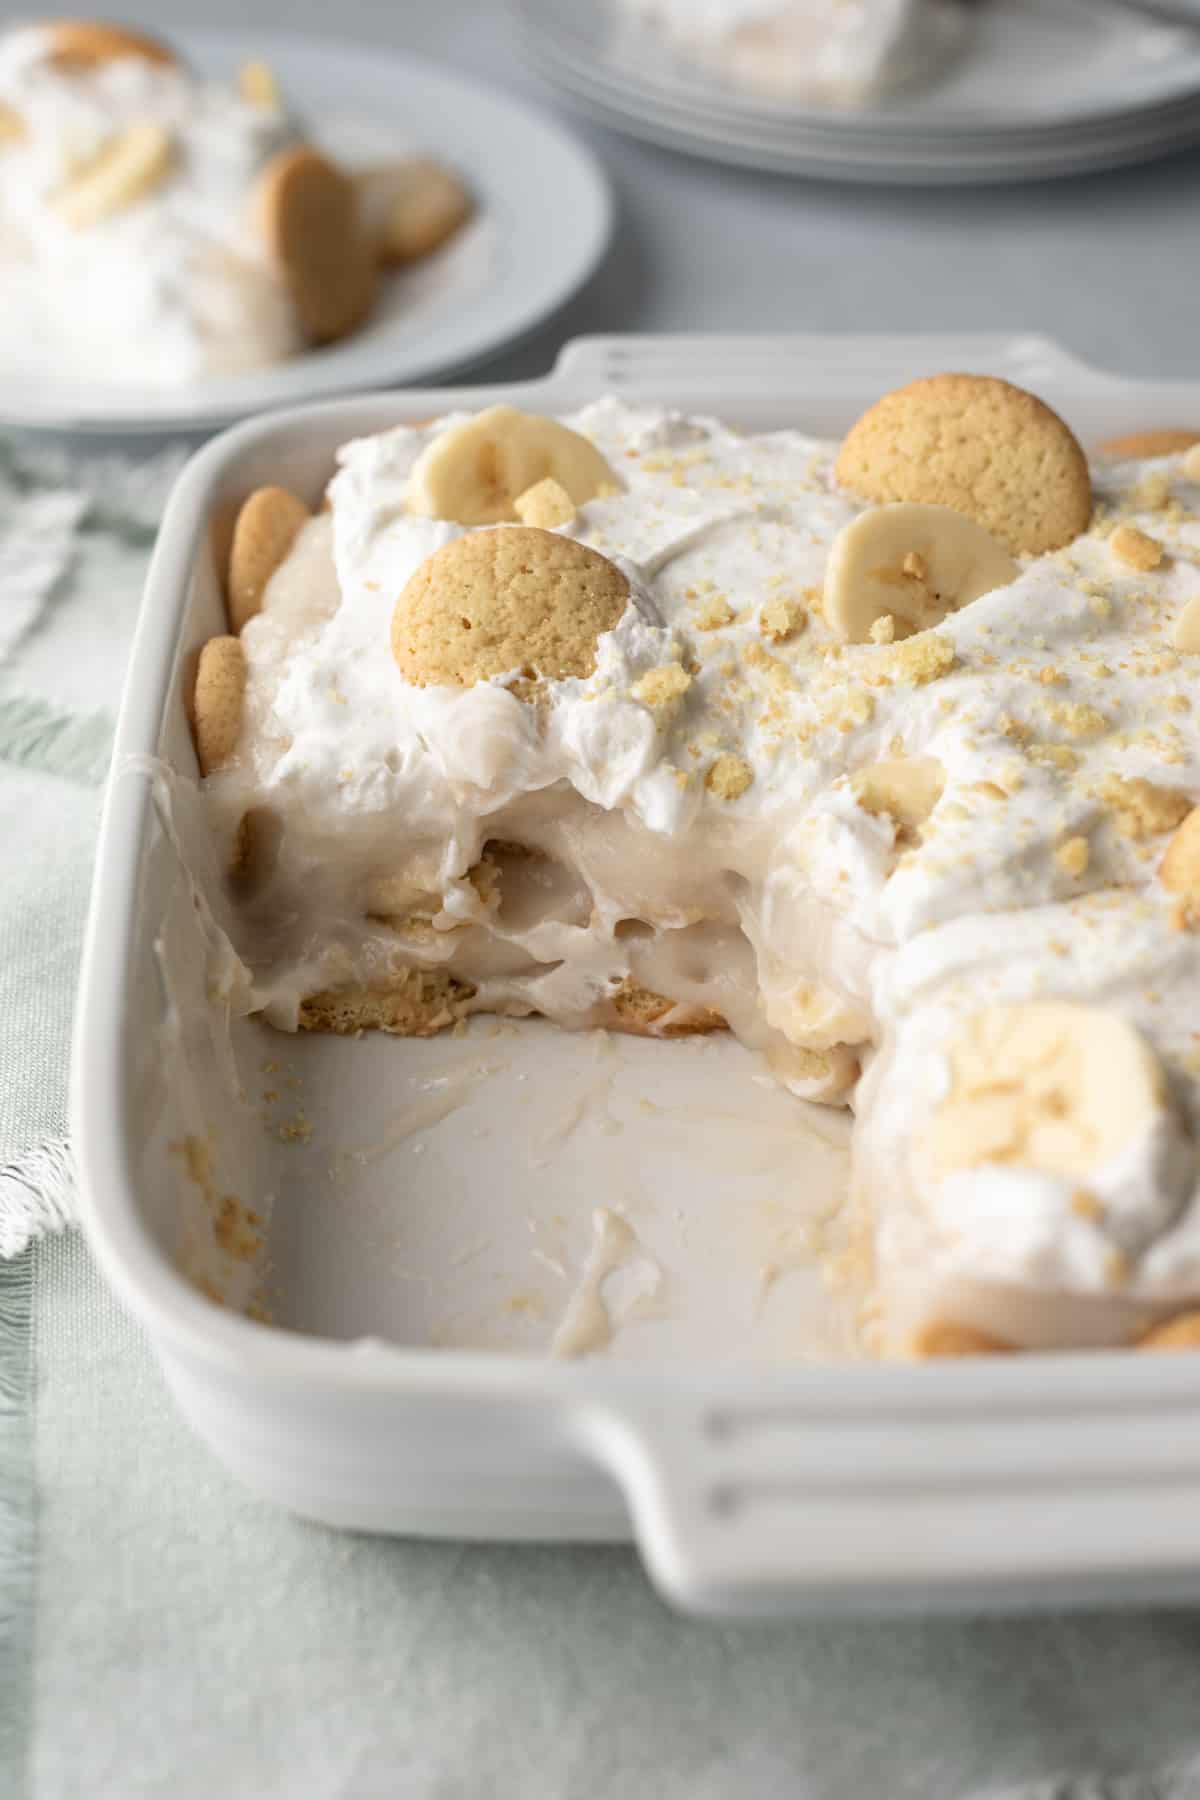 side view of the inside creamy layers of banana pudding in a white dish.